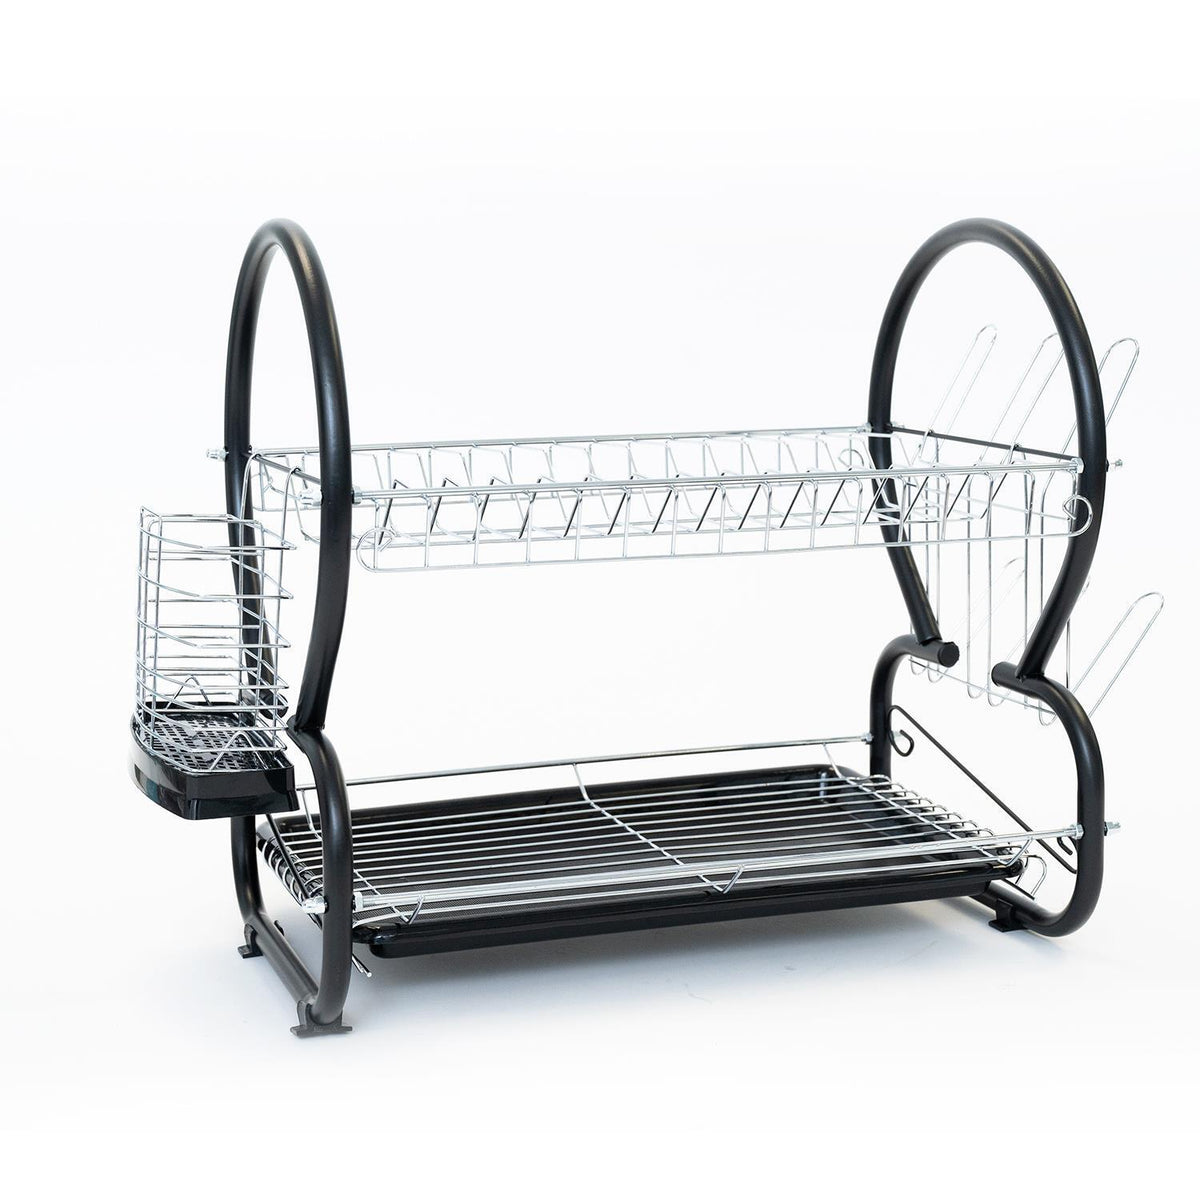 Two-Tier Black Dish Drain Rack With Utensils Holder